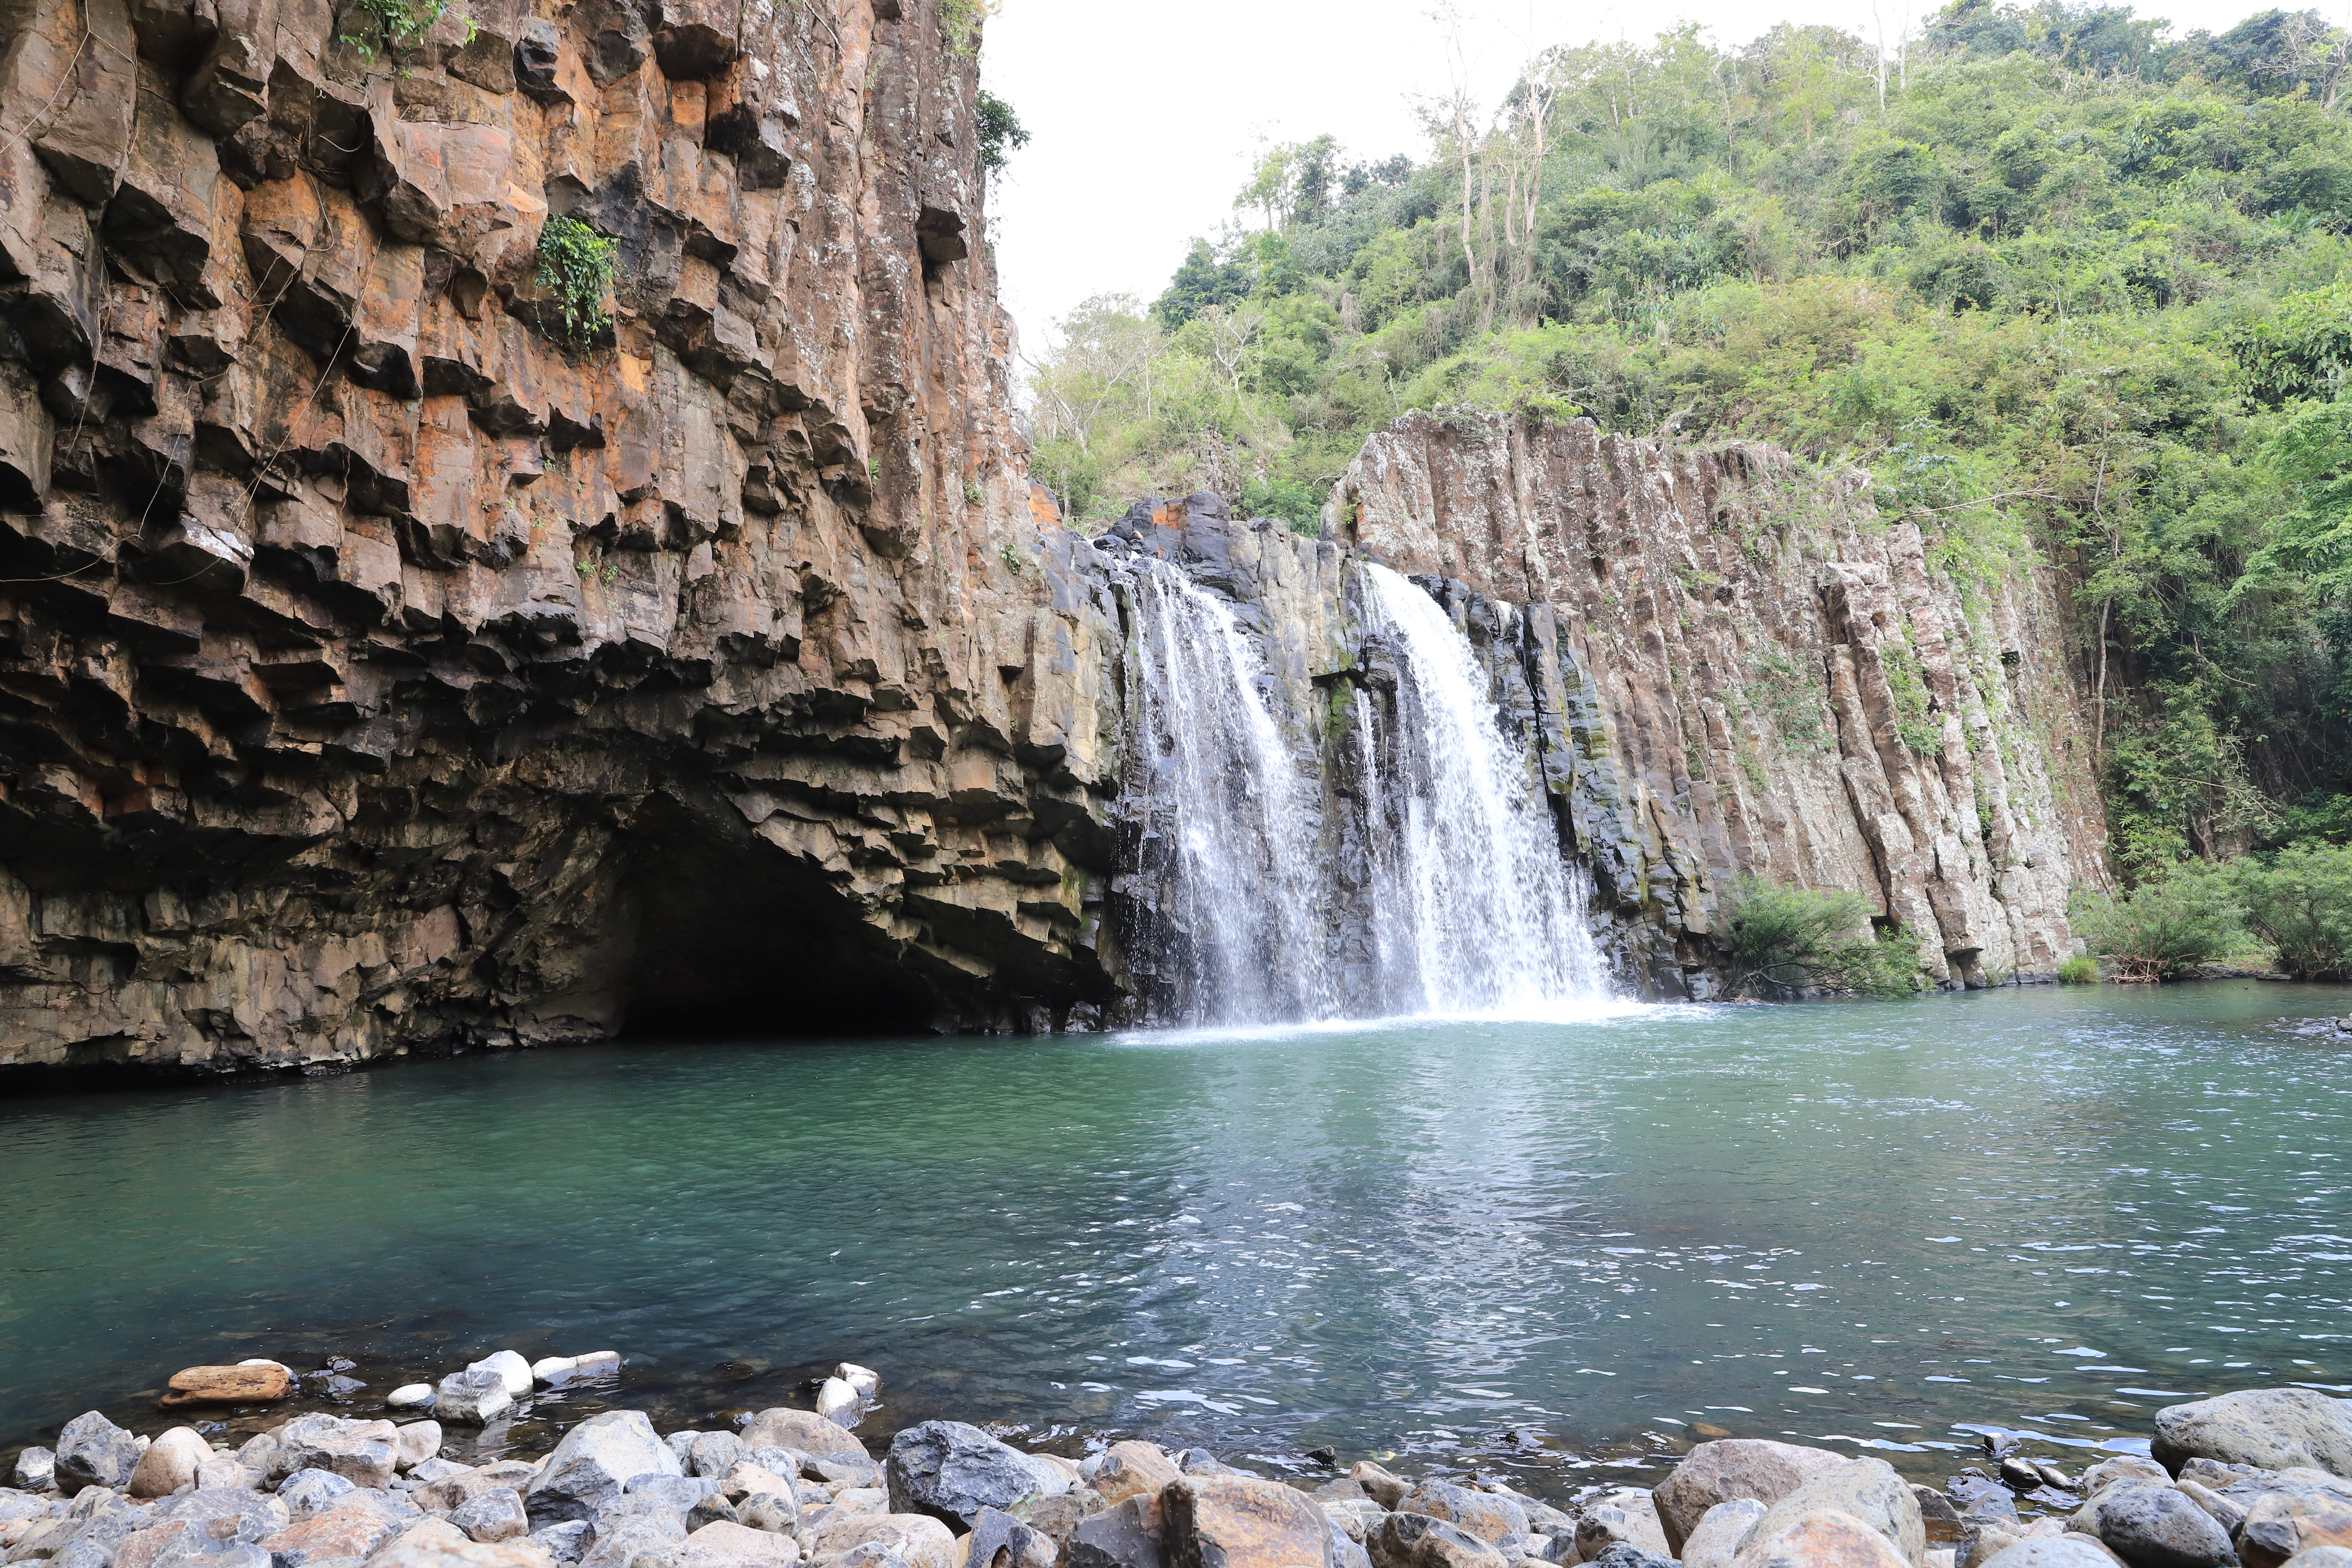 Vuc Hom waterfall features an unspoiled beauty. Photo: Vuong Anh